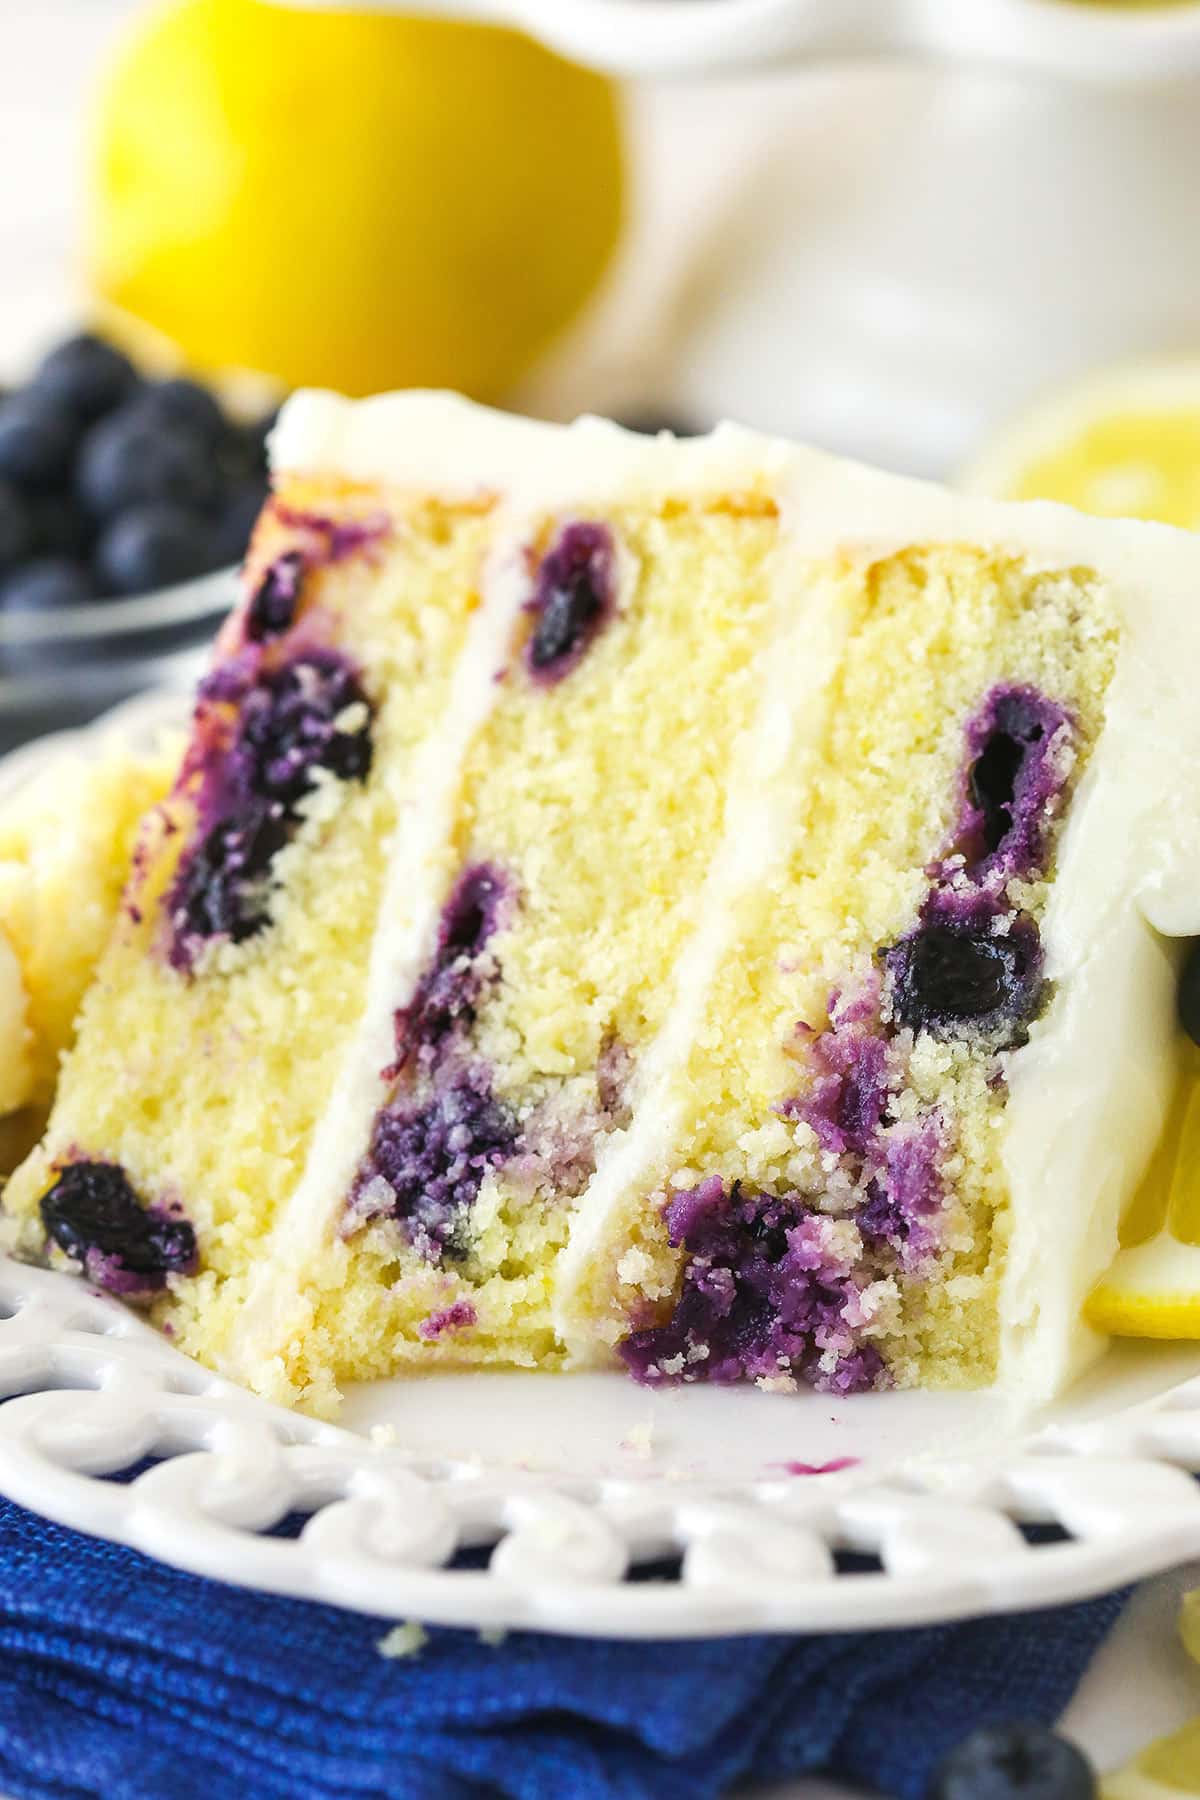 A slice of lemon blueberry cake on a plate with a bite taken out of it.